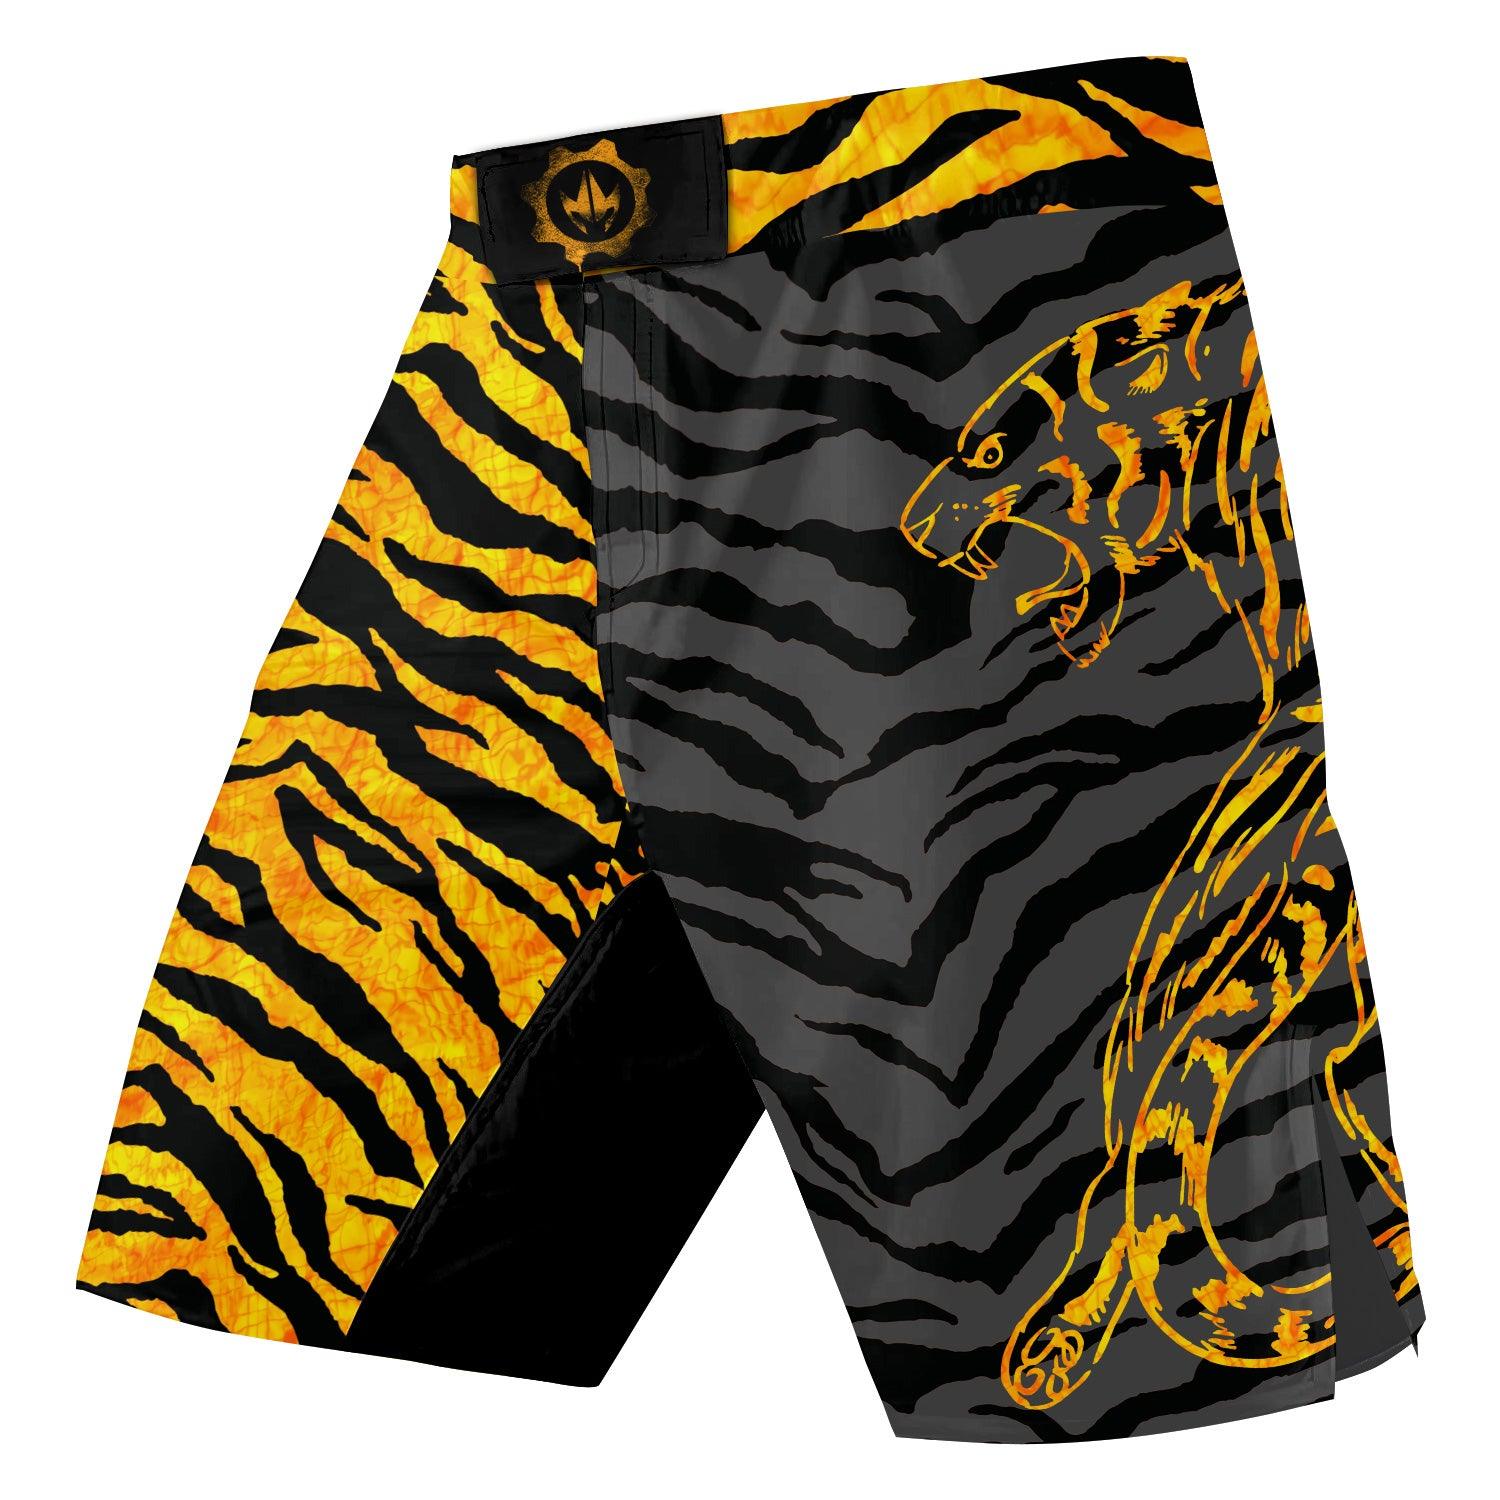 Tiger's Reflection Fight Shorts